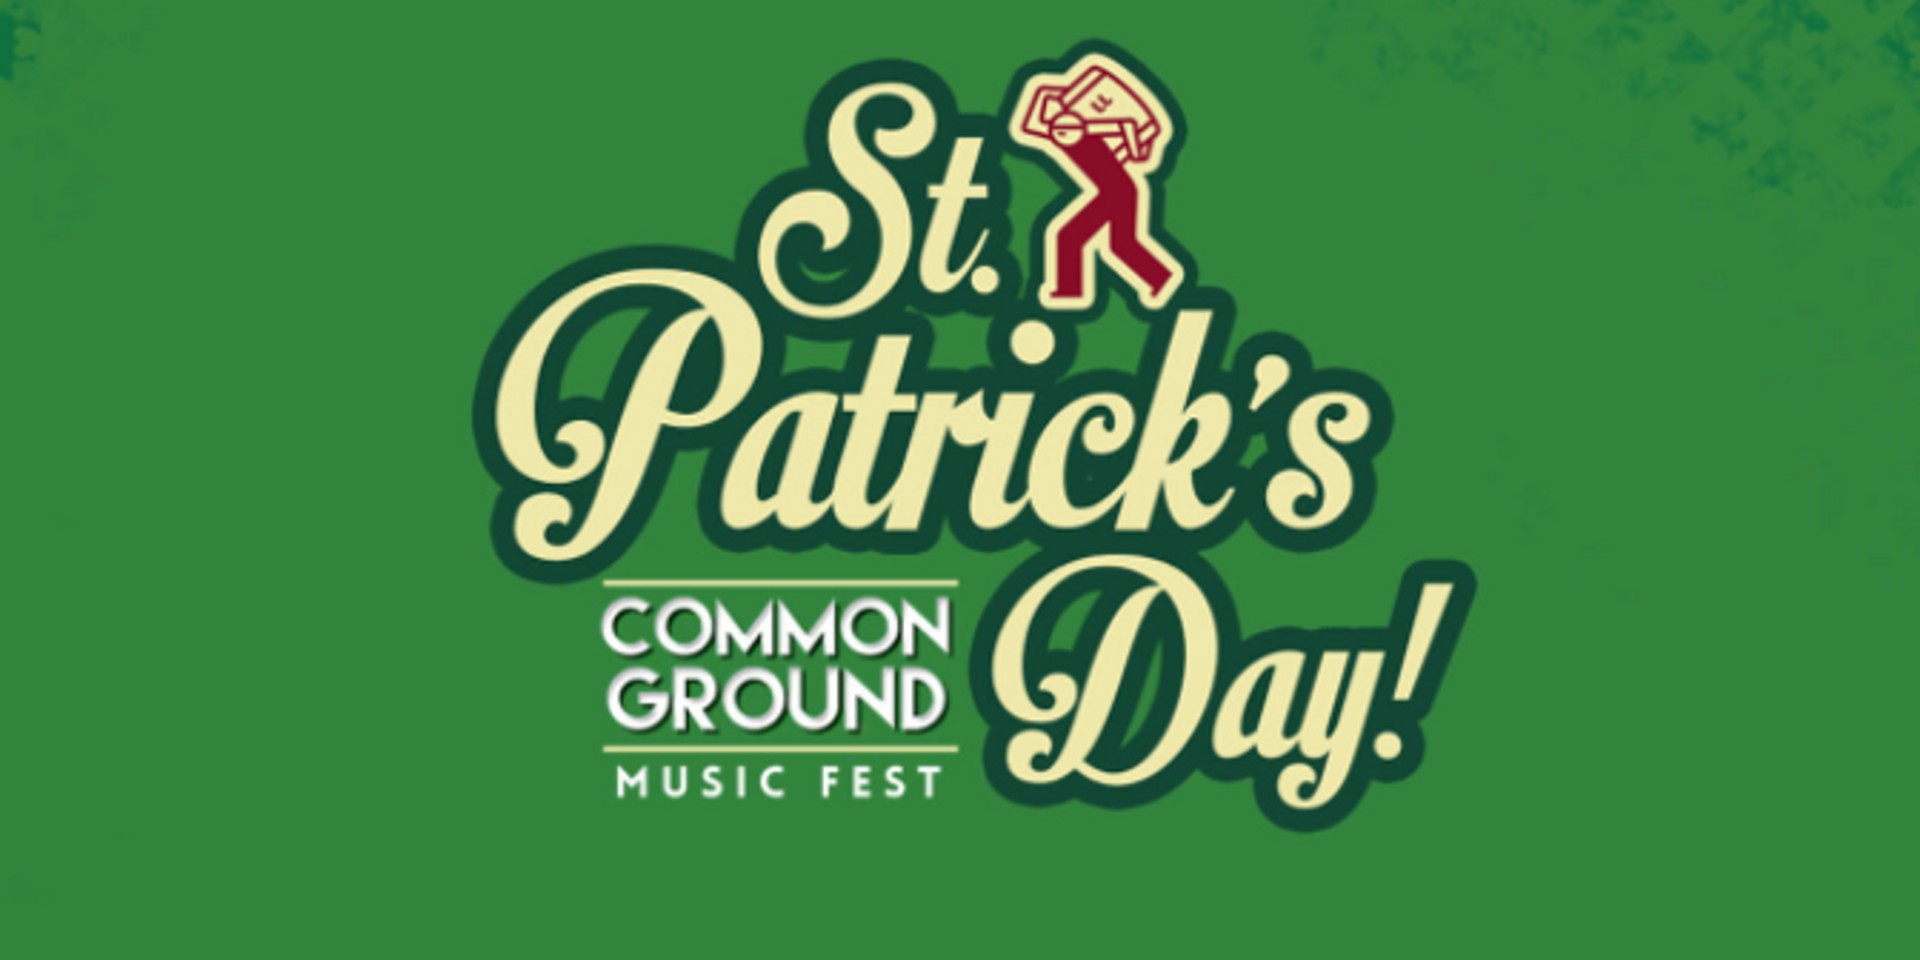 Celebrate St. Patrick's Day with Jameson Irish Whiskey at the Common Ground Music Fest